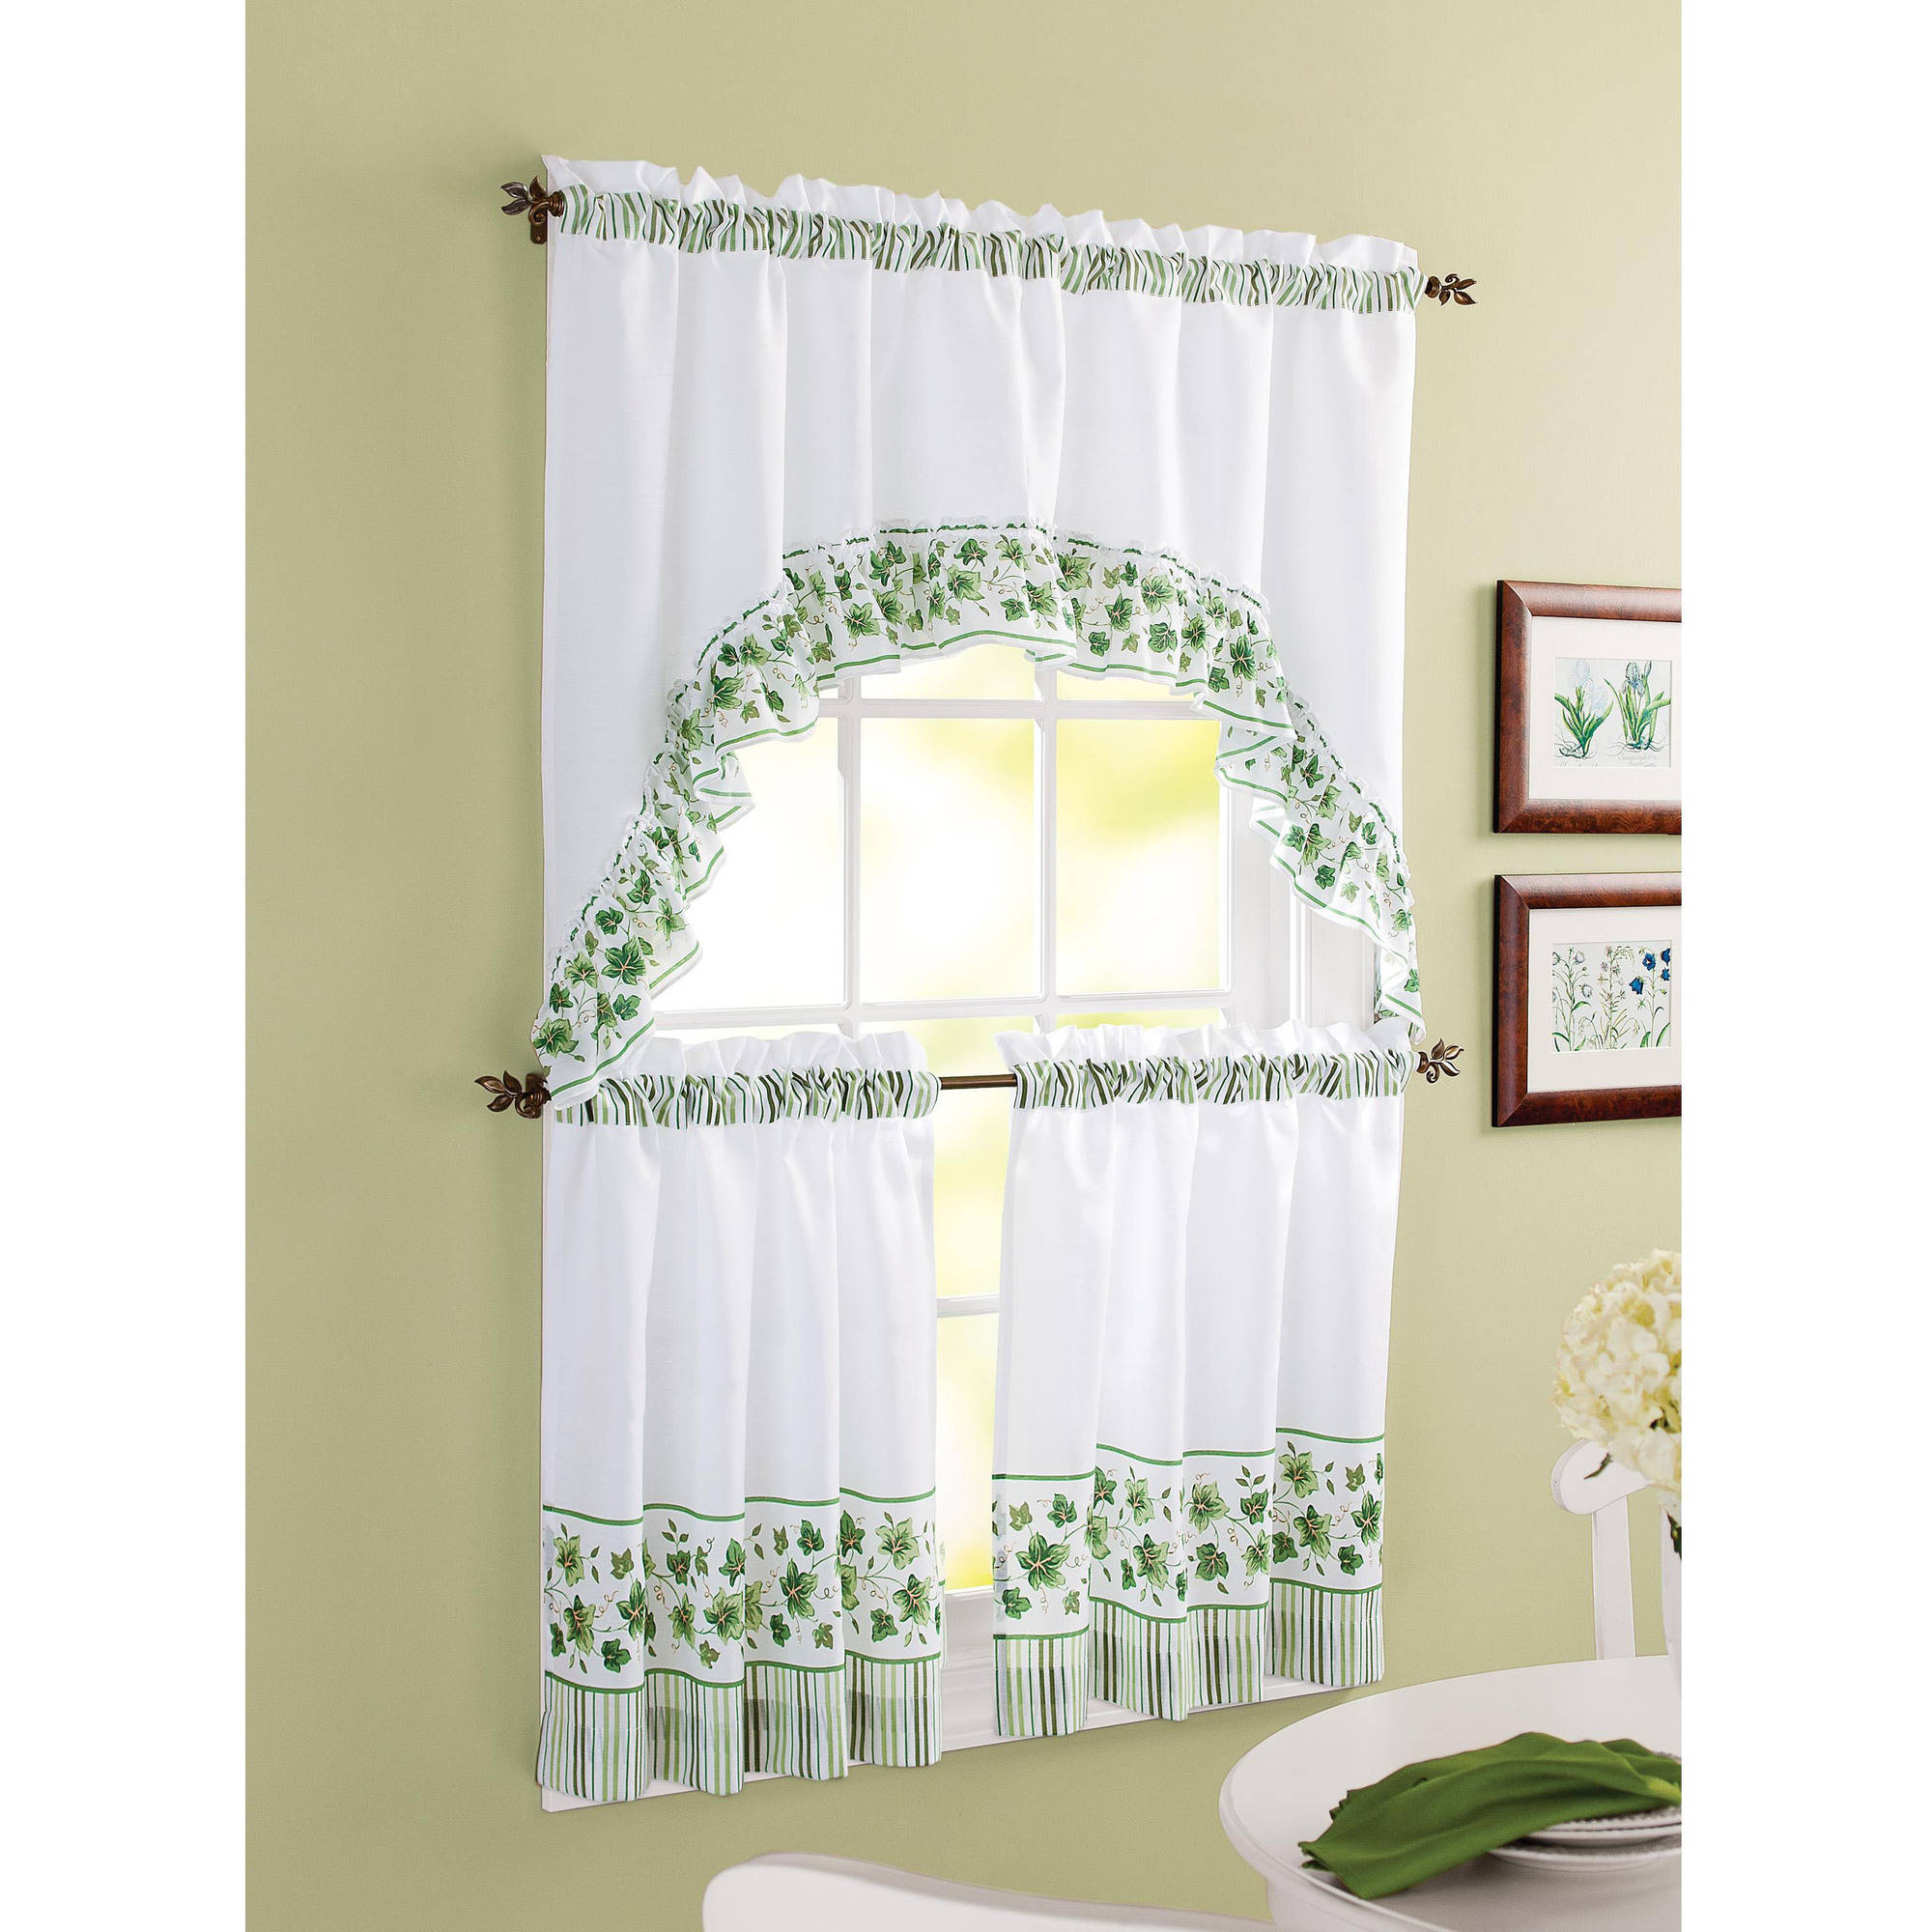 kitchen curtain mainstays seashell toss printed valance and kitchen curtains, set of 2 - CLAMQUI